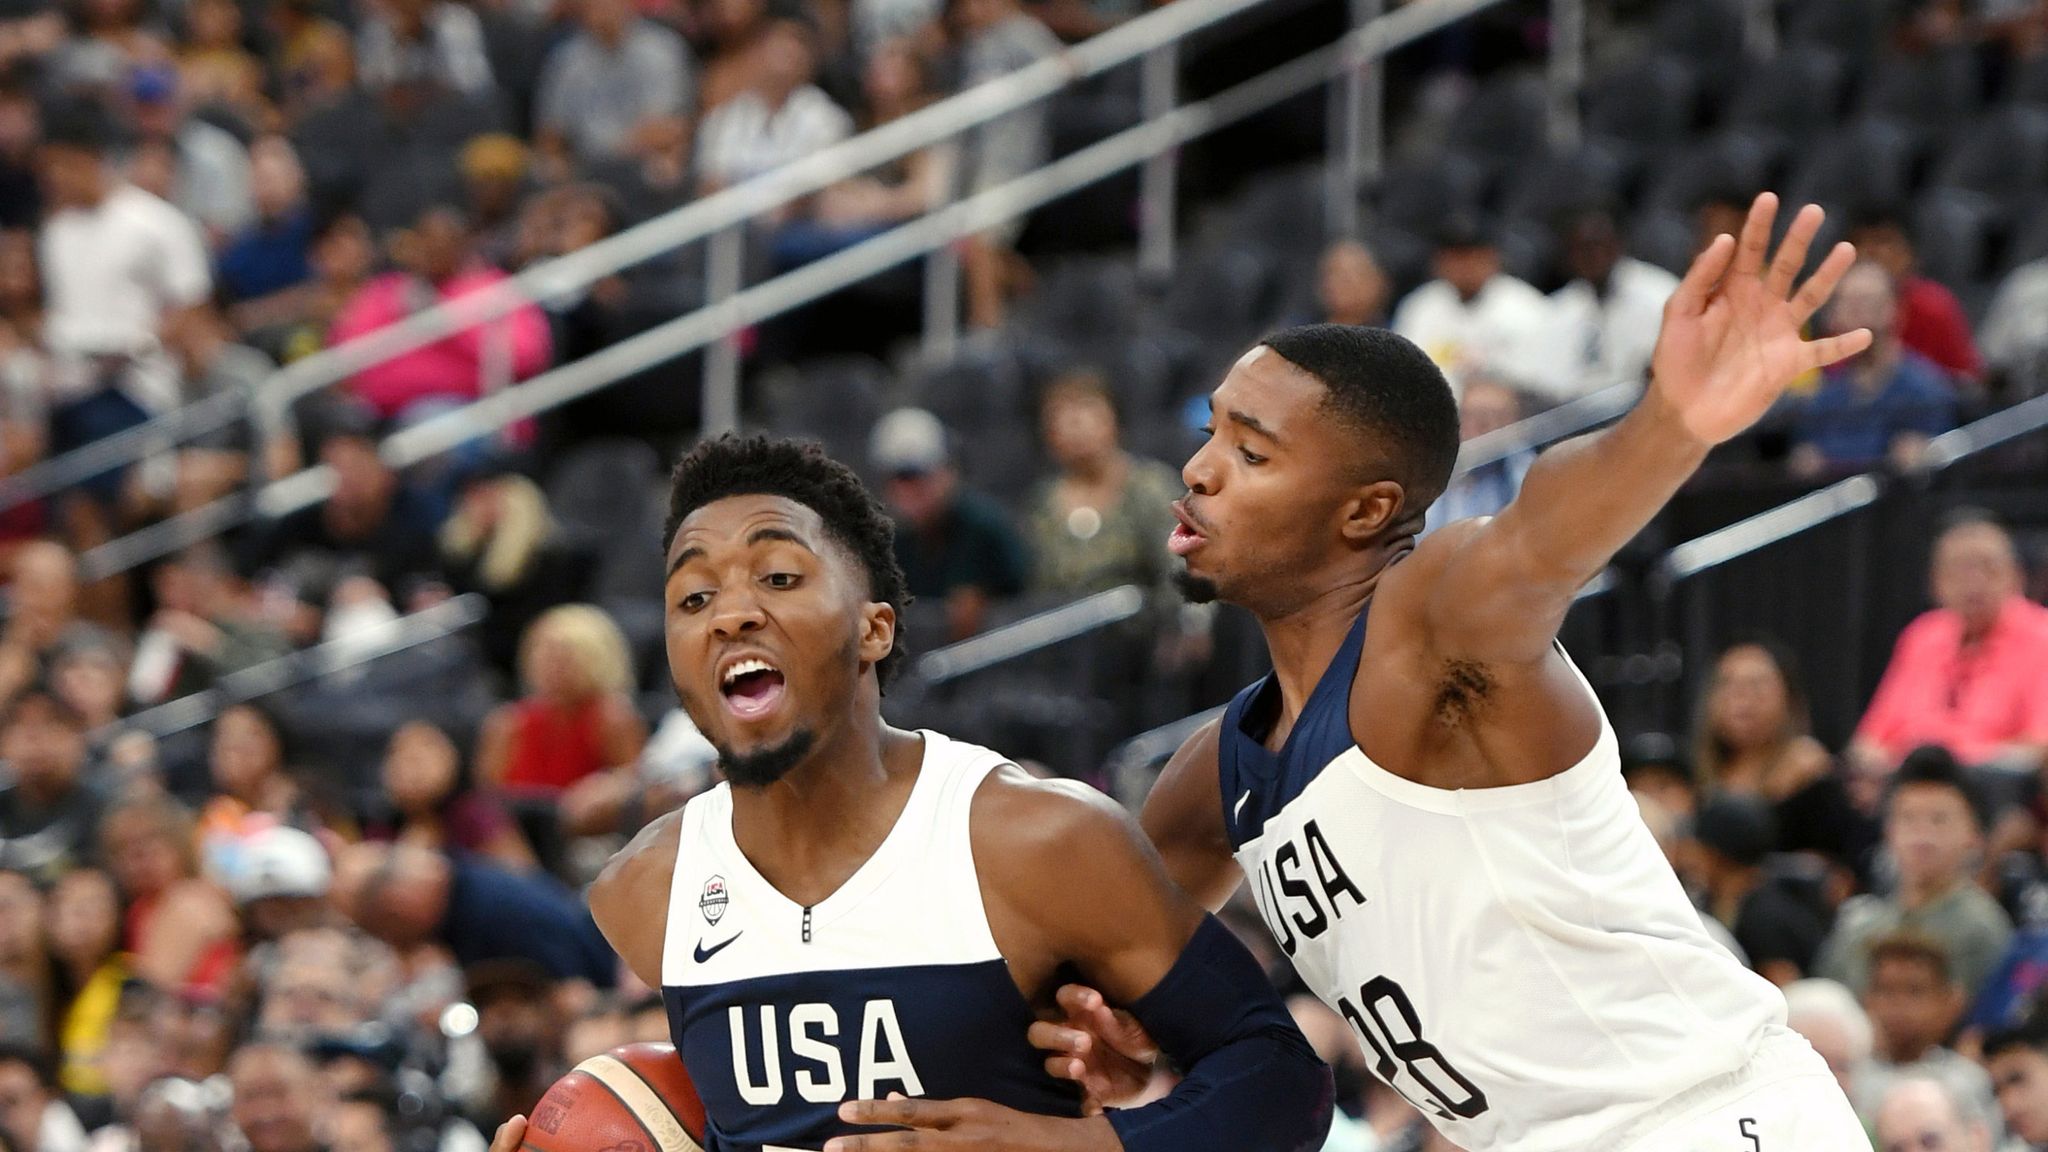 Donovan Mitchell invited to participate in Team USA FIBA training camp